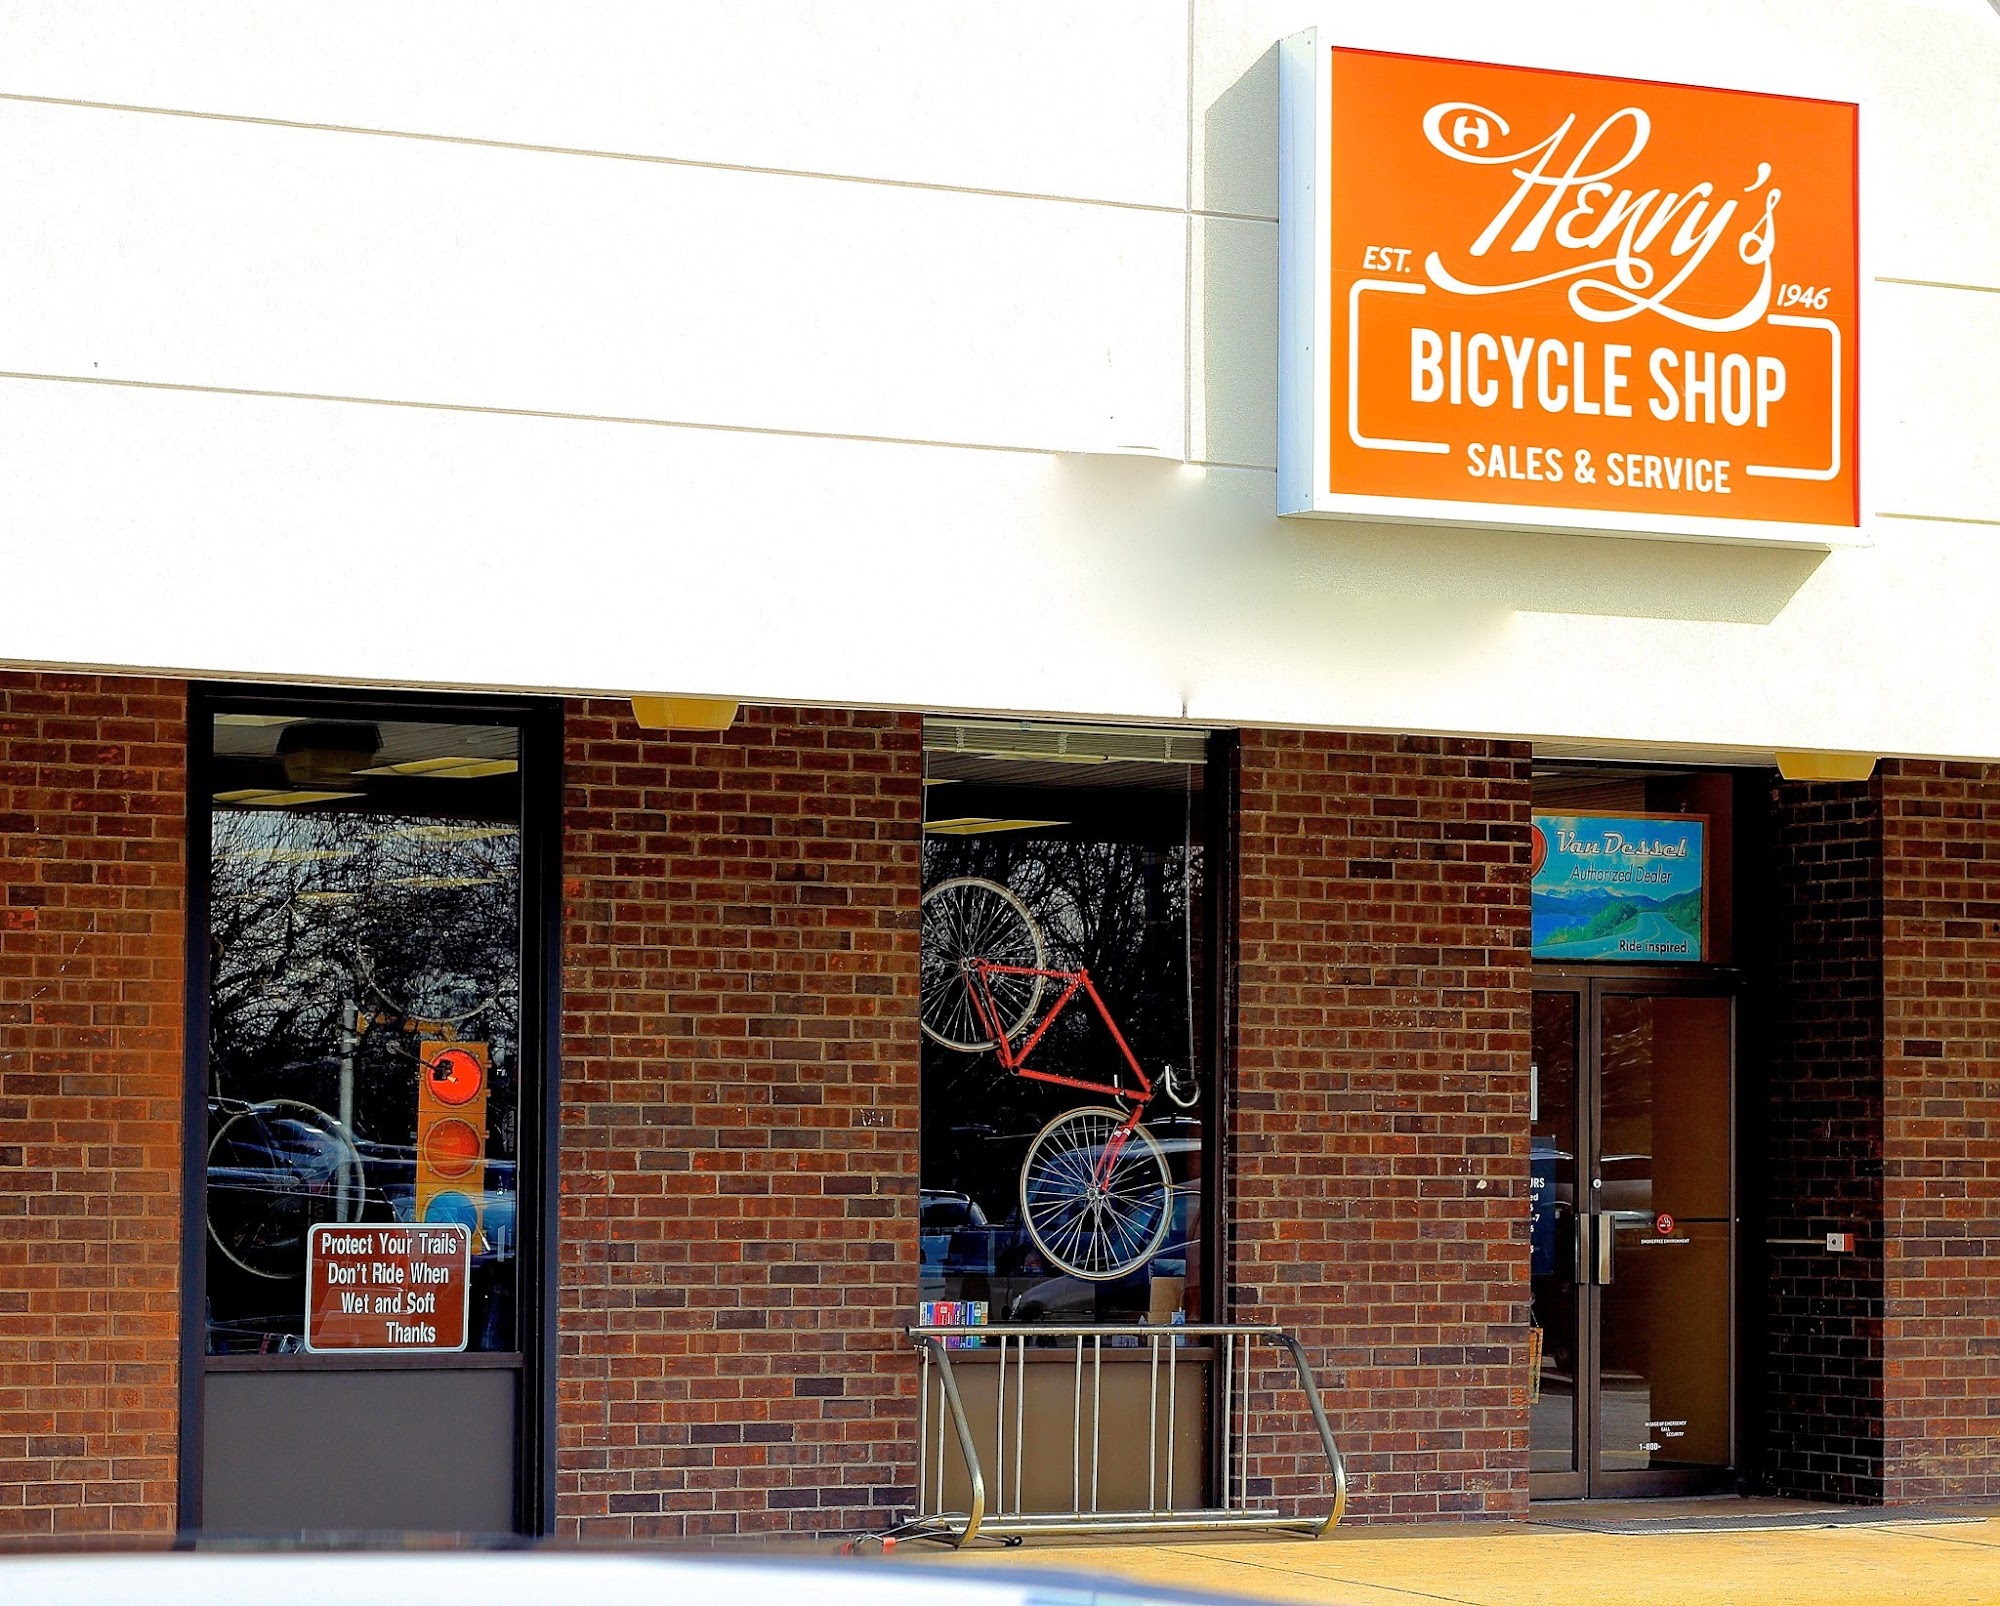 Henry's Bicycle Shop